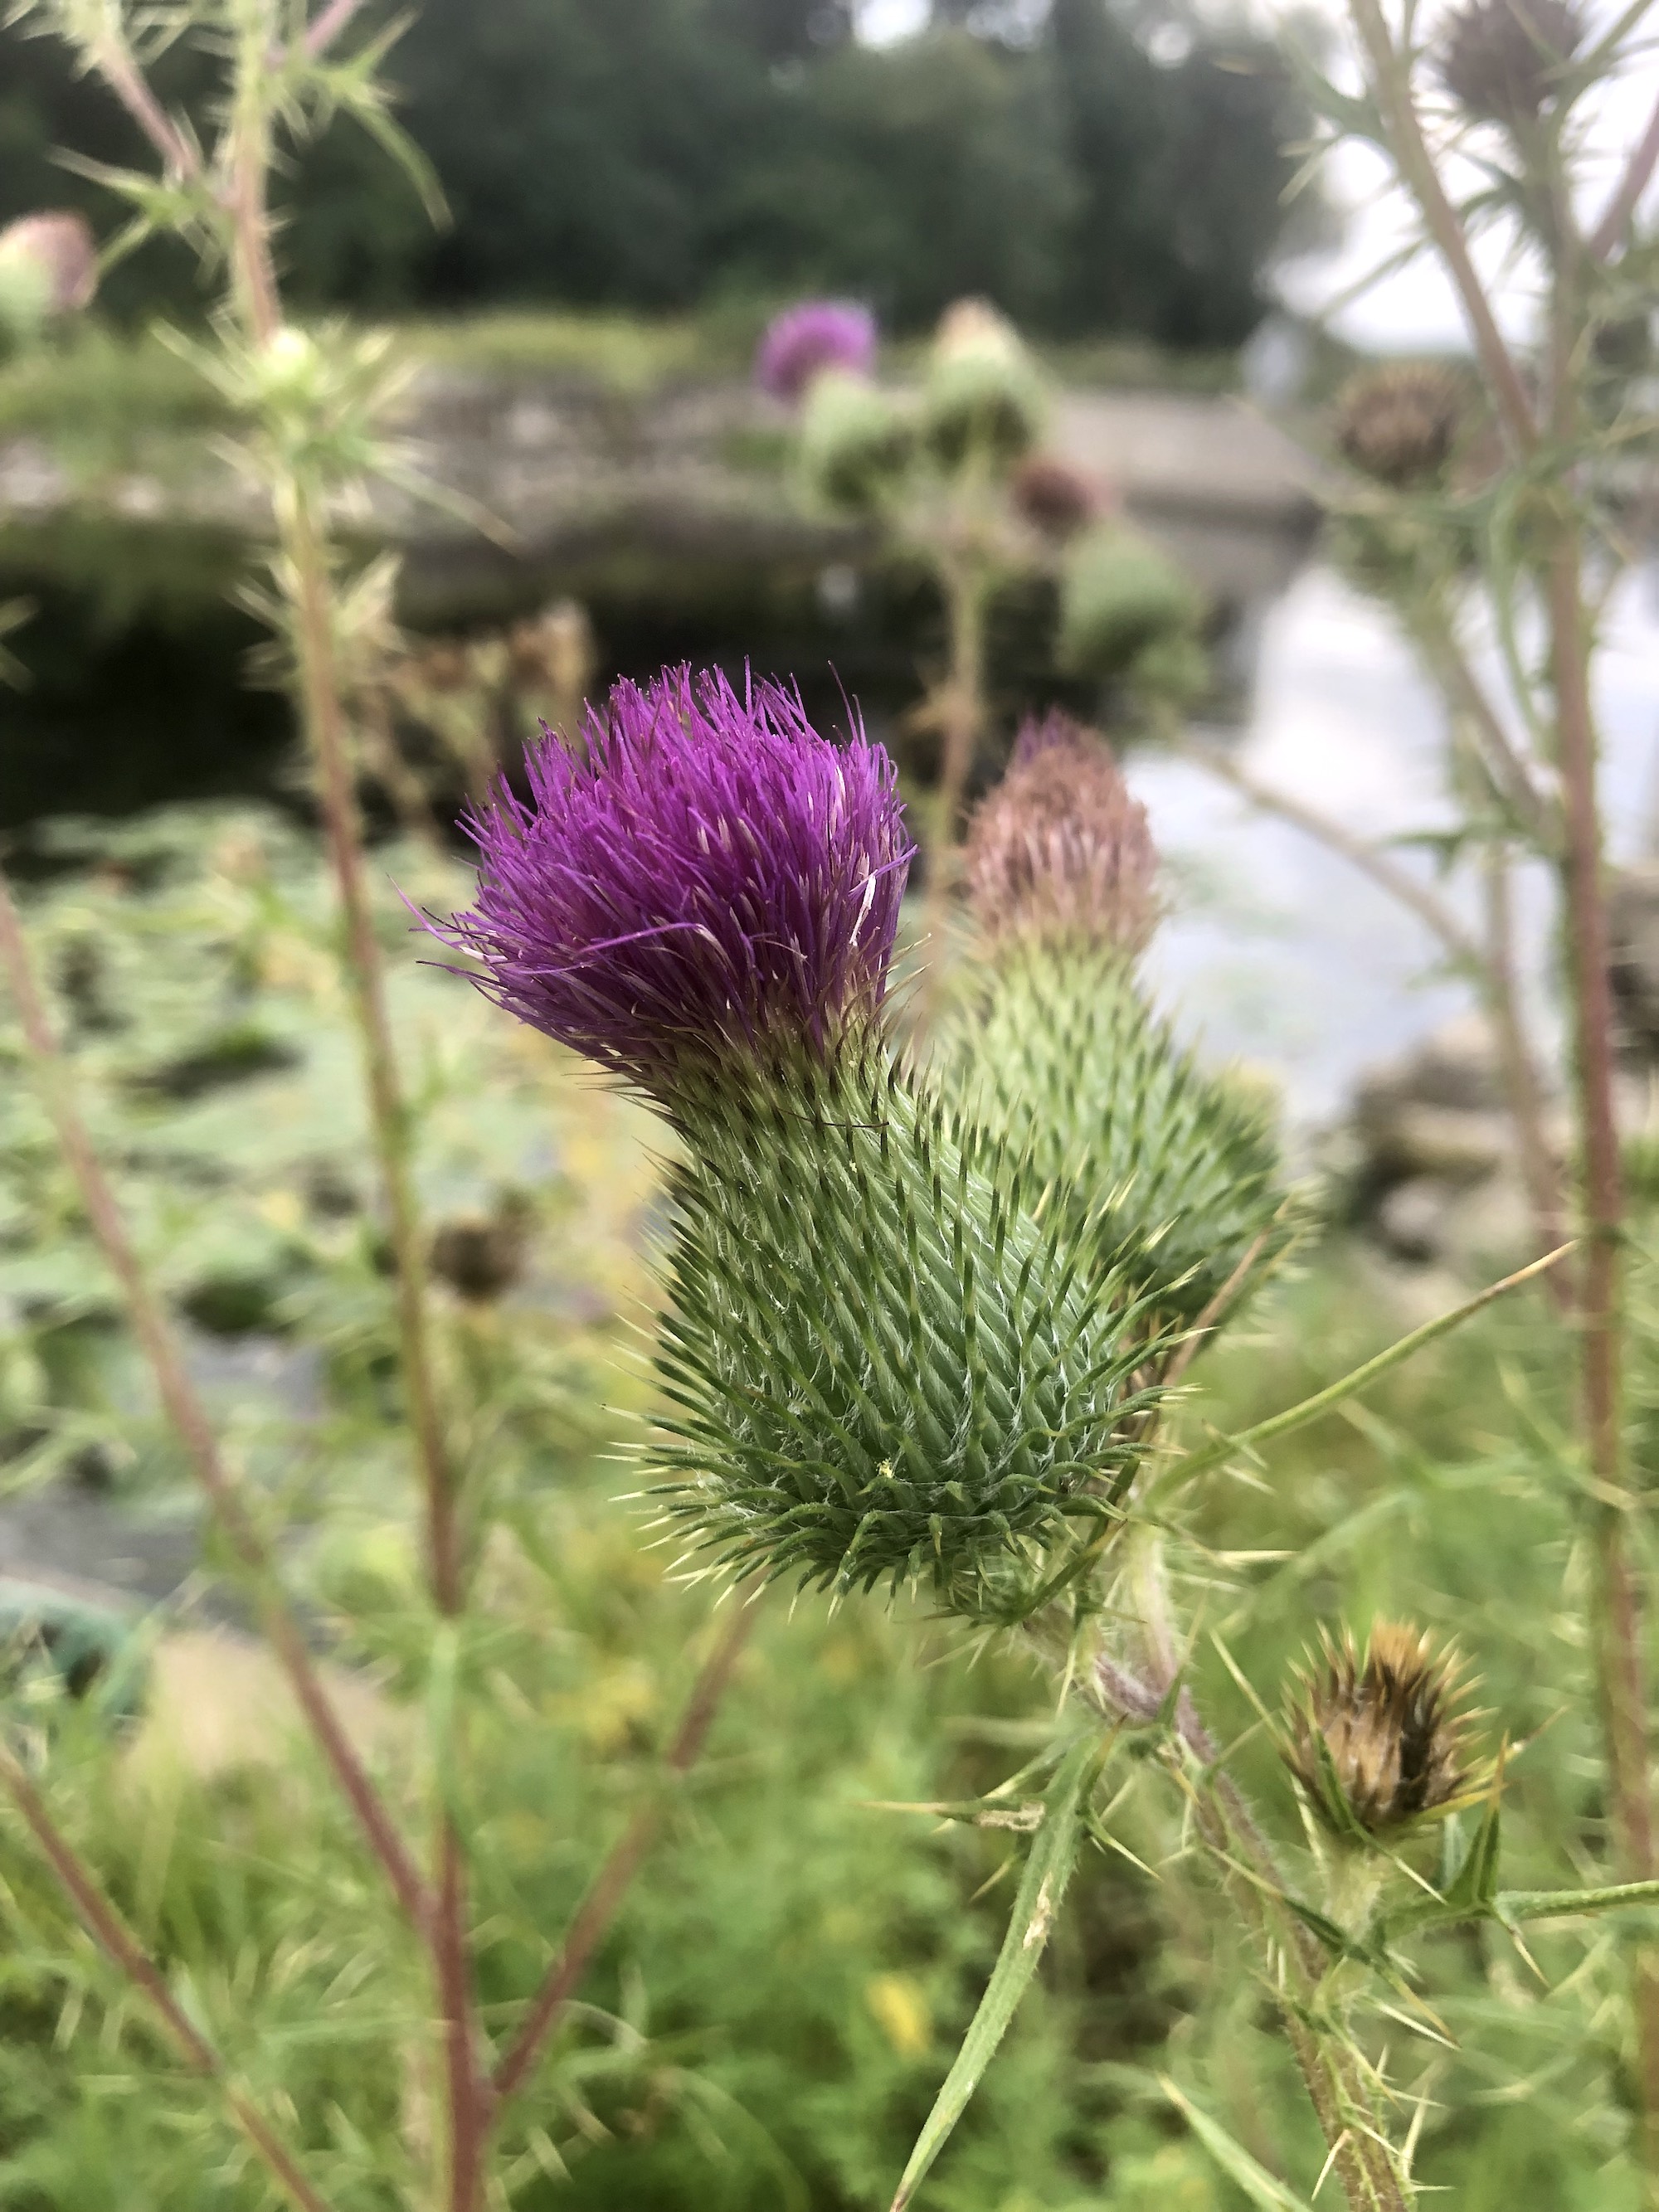 Bull Thistle along shore of Wingra Creek in Vilas Park in Madison, Wisconsin on August 15, 2022.